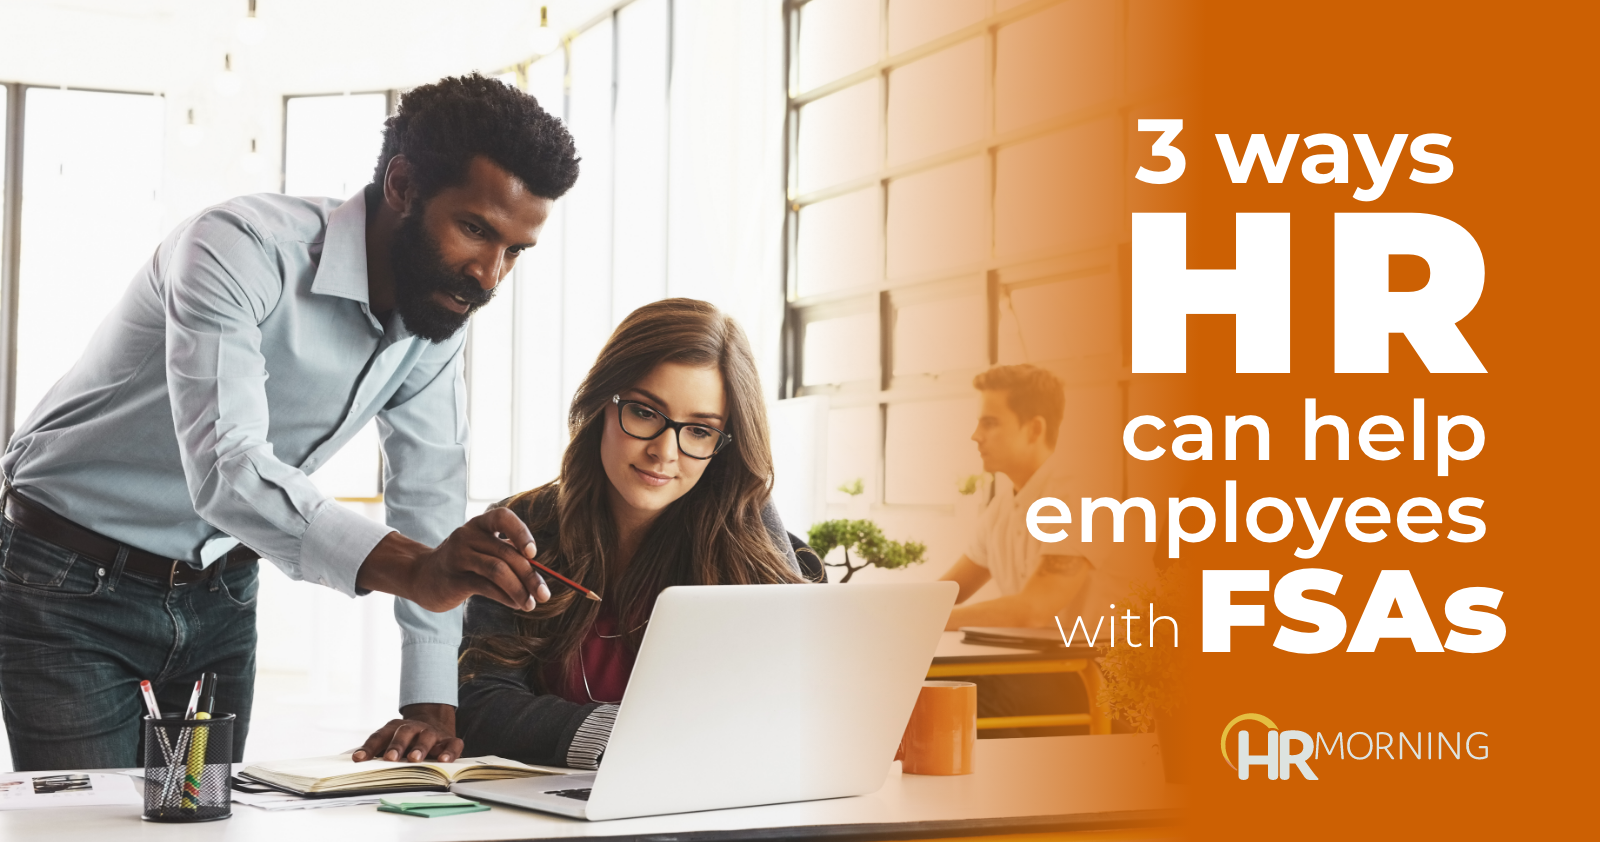 3 Ways HR can help employees with FSAs